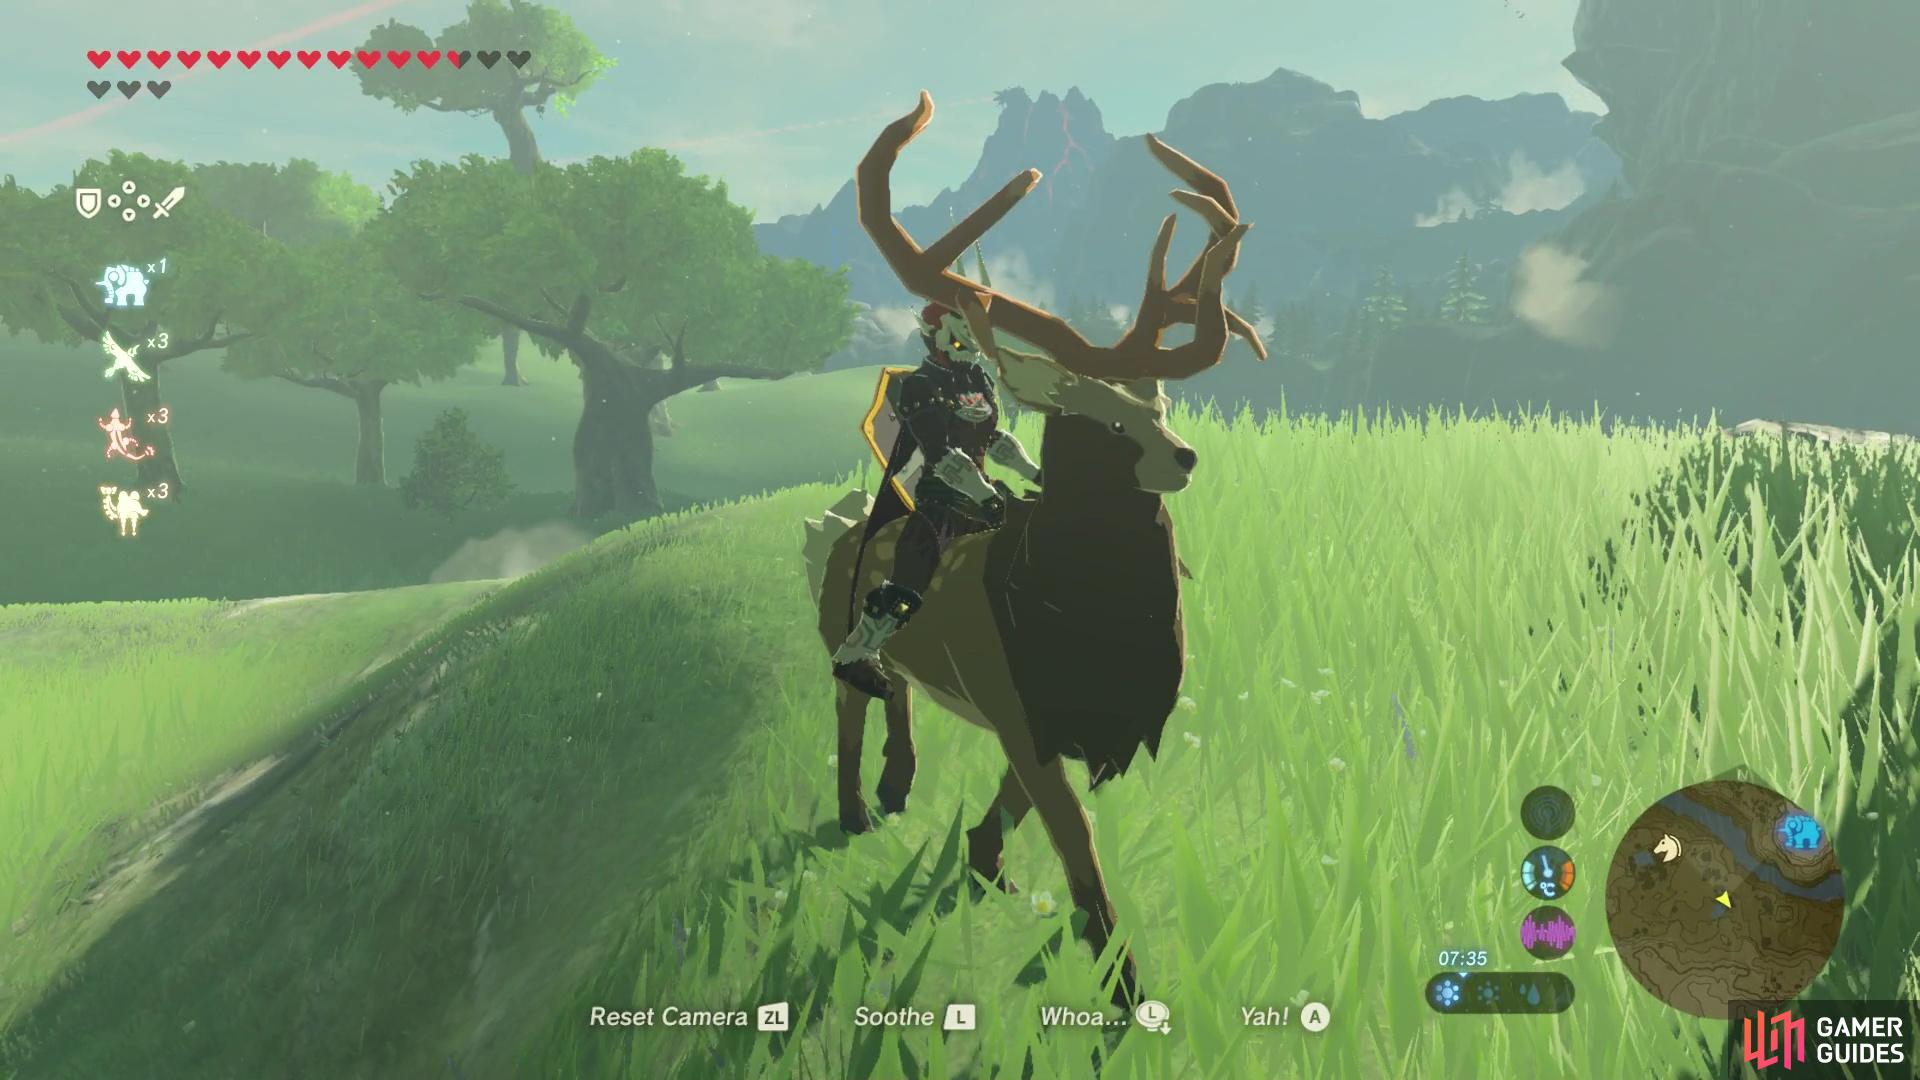 The goal of this shrine quest is to mount a Stag